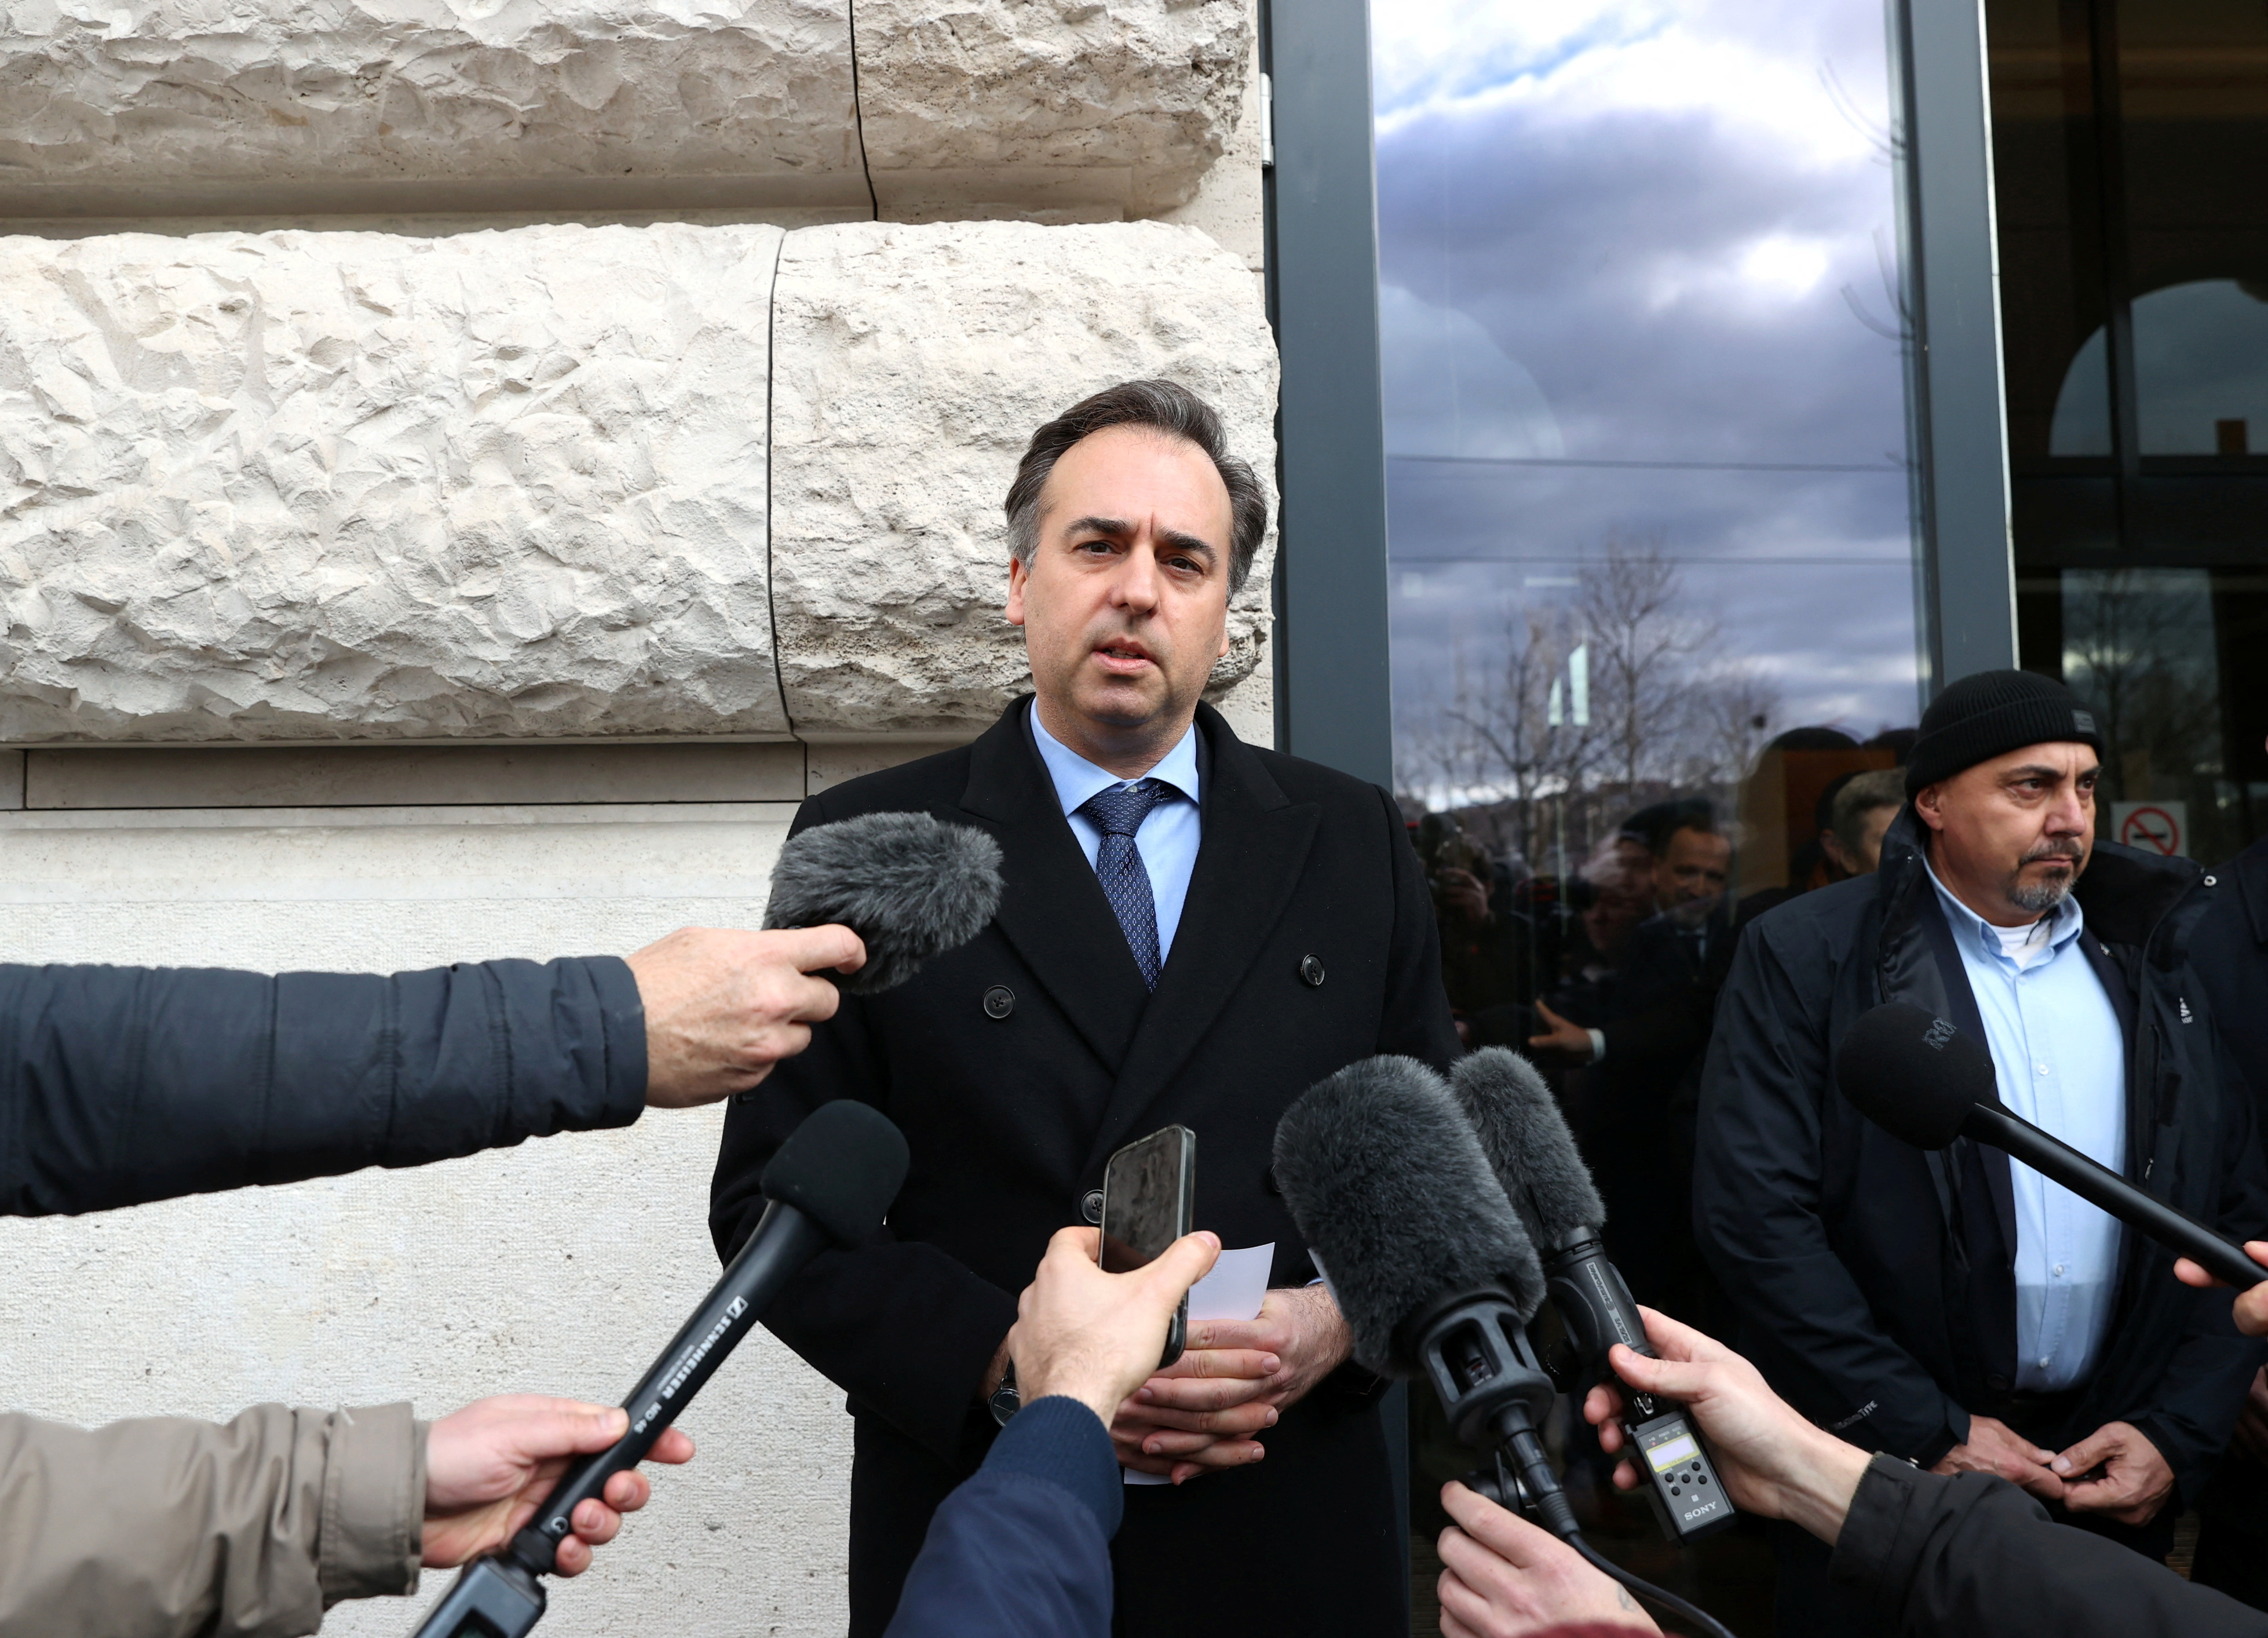 U.S. ambassador to Hungary Pressman speaks to media after attending Hungarian parliament's session in Budapest